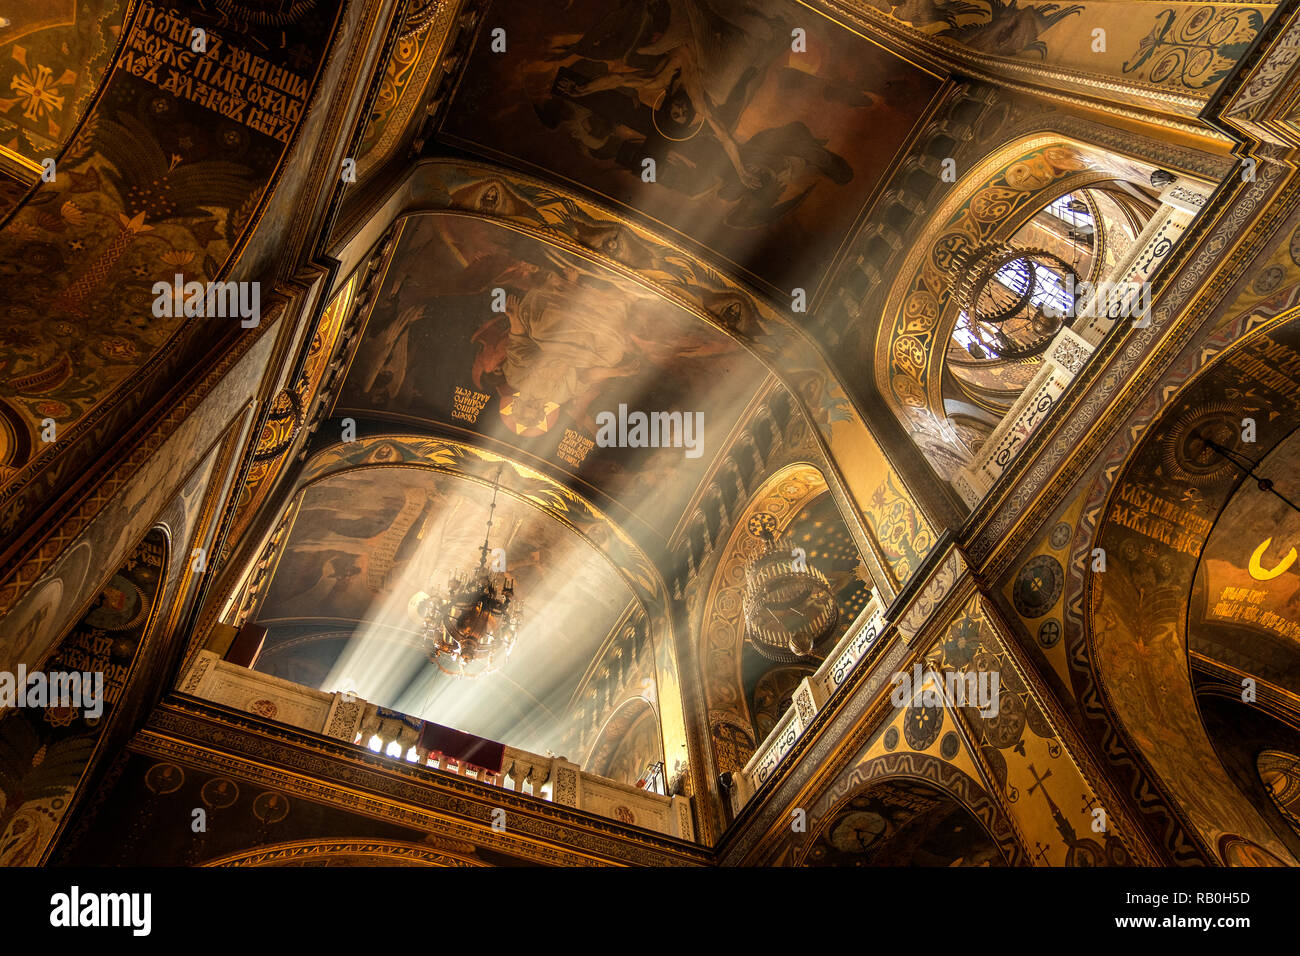 Rays of sunlight under the dome of the cathedral. St. Vladimir's Cathedral Interior, Kyiv, Ukraine Stock Photo